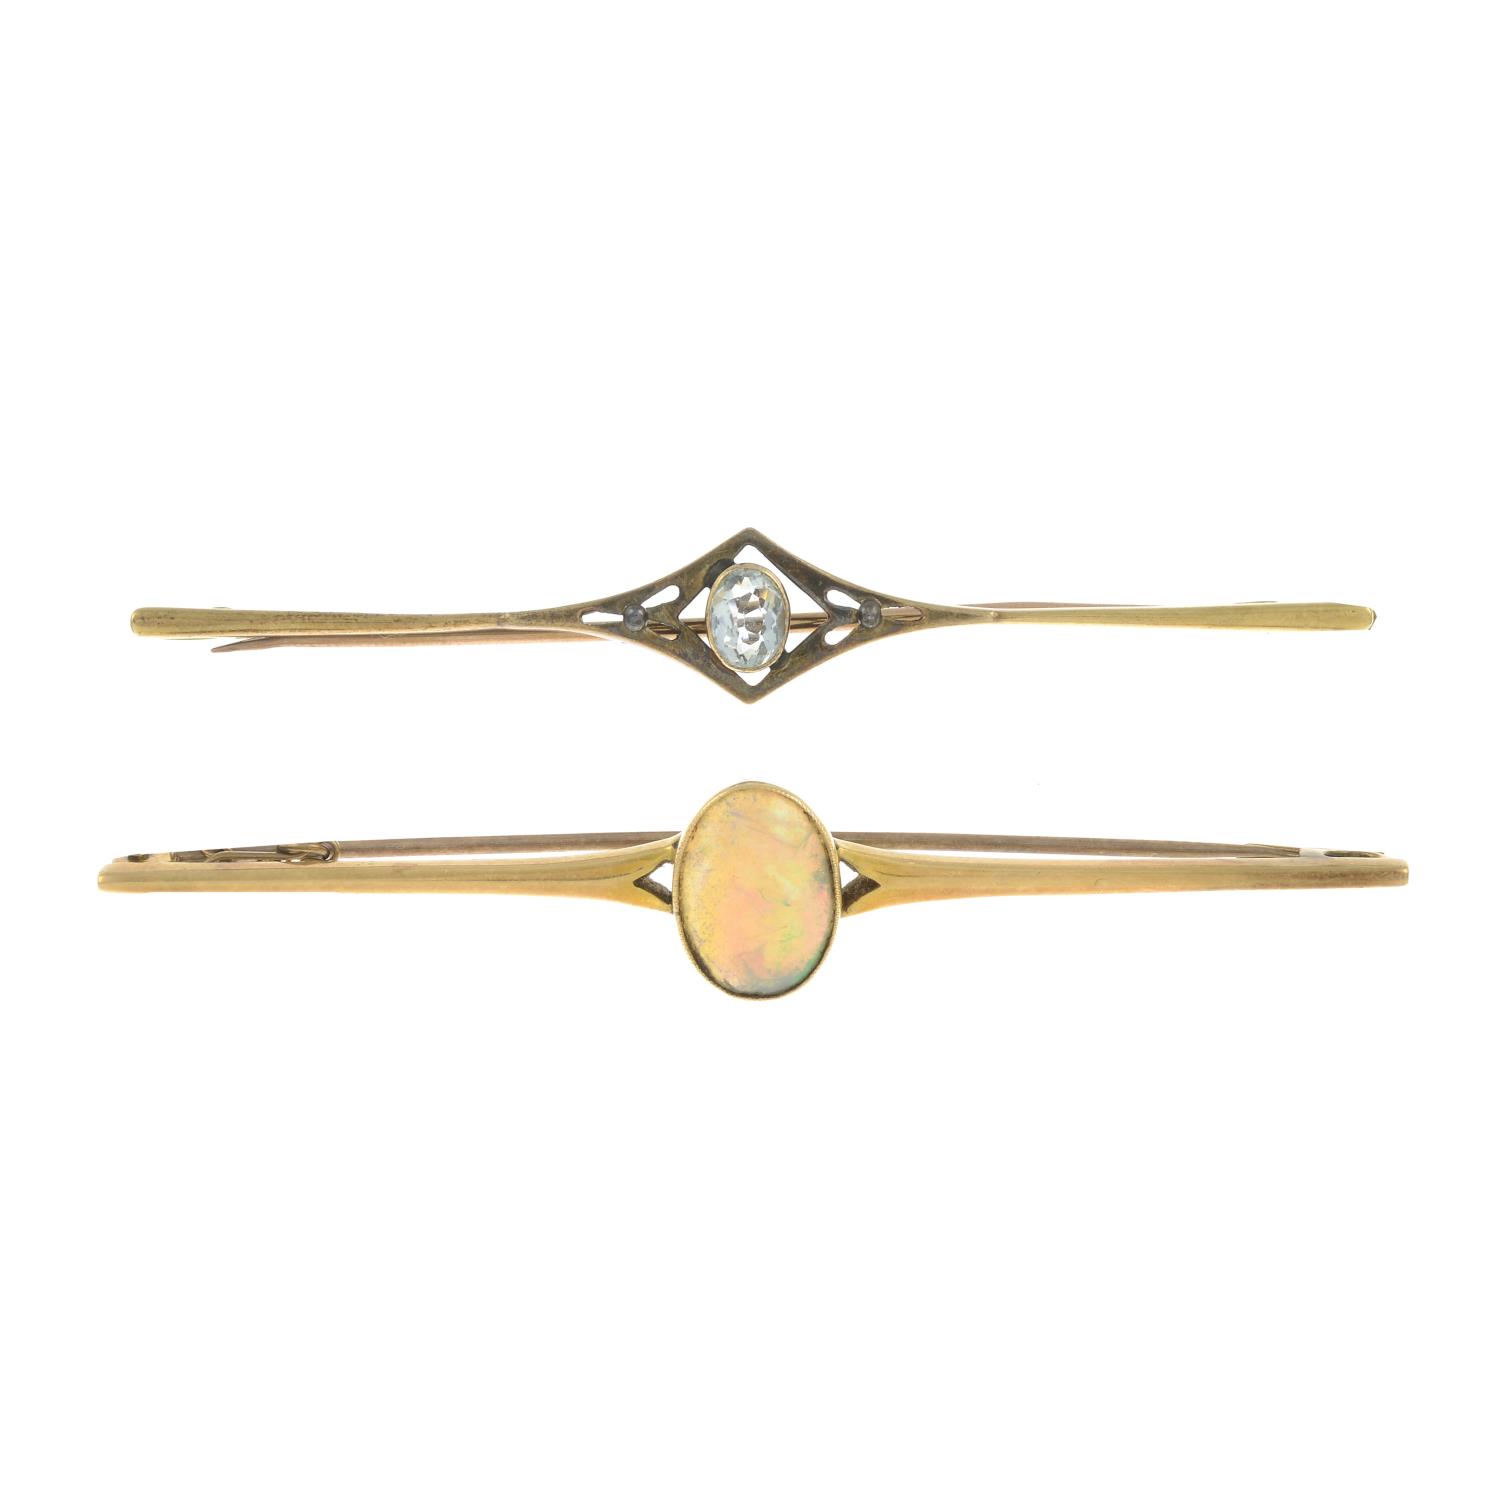 Early 20th century 15ct gold opal brooch,